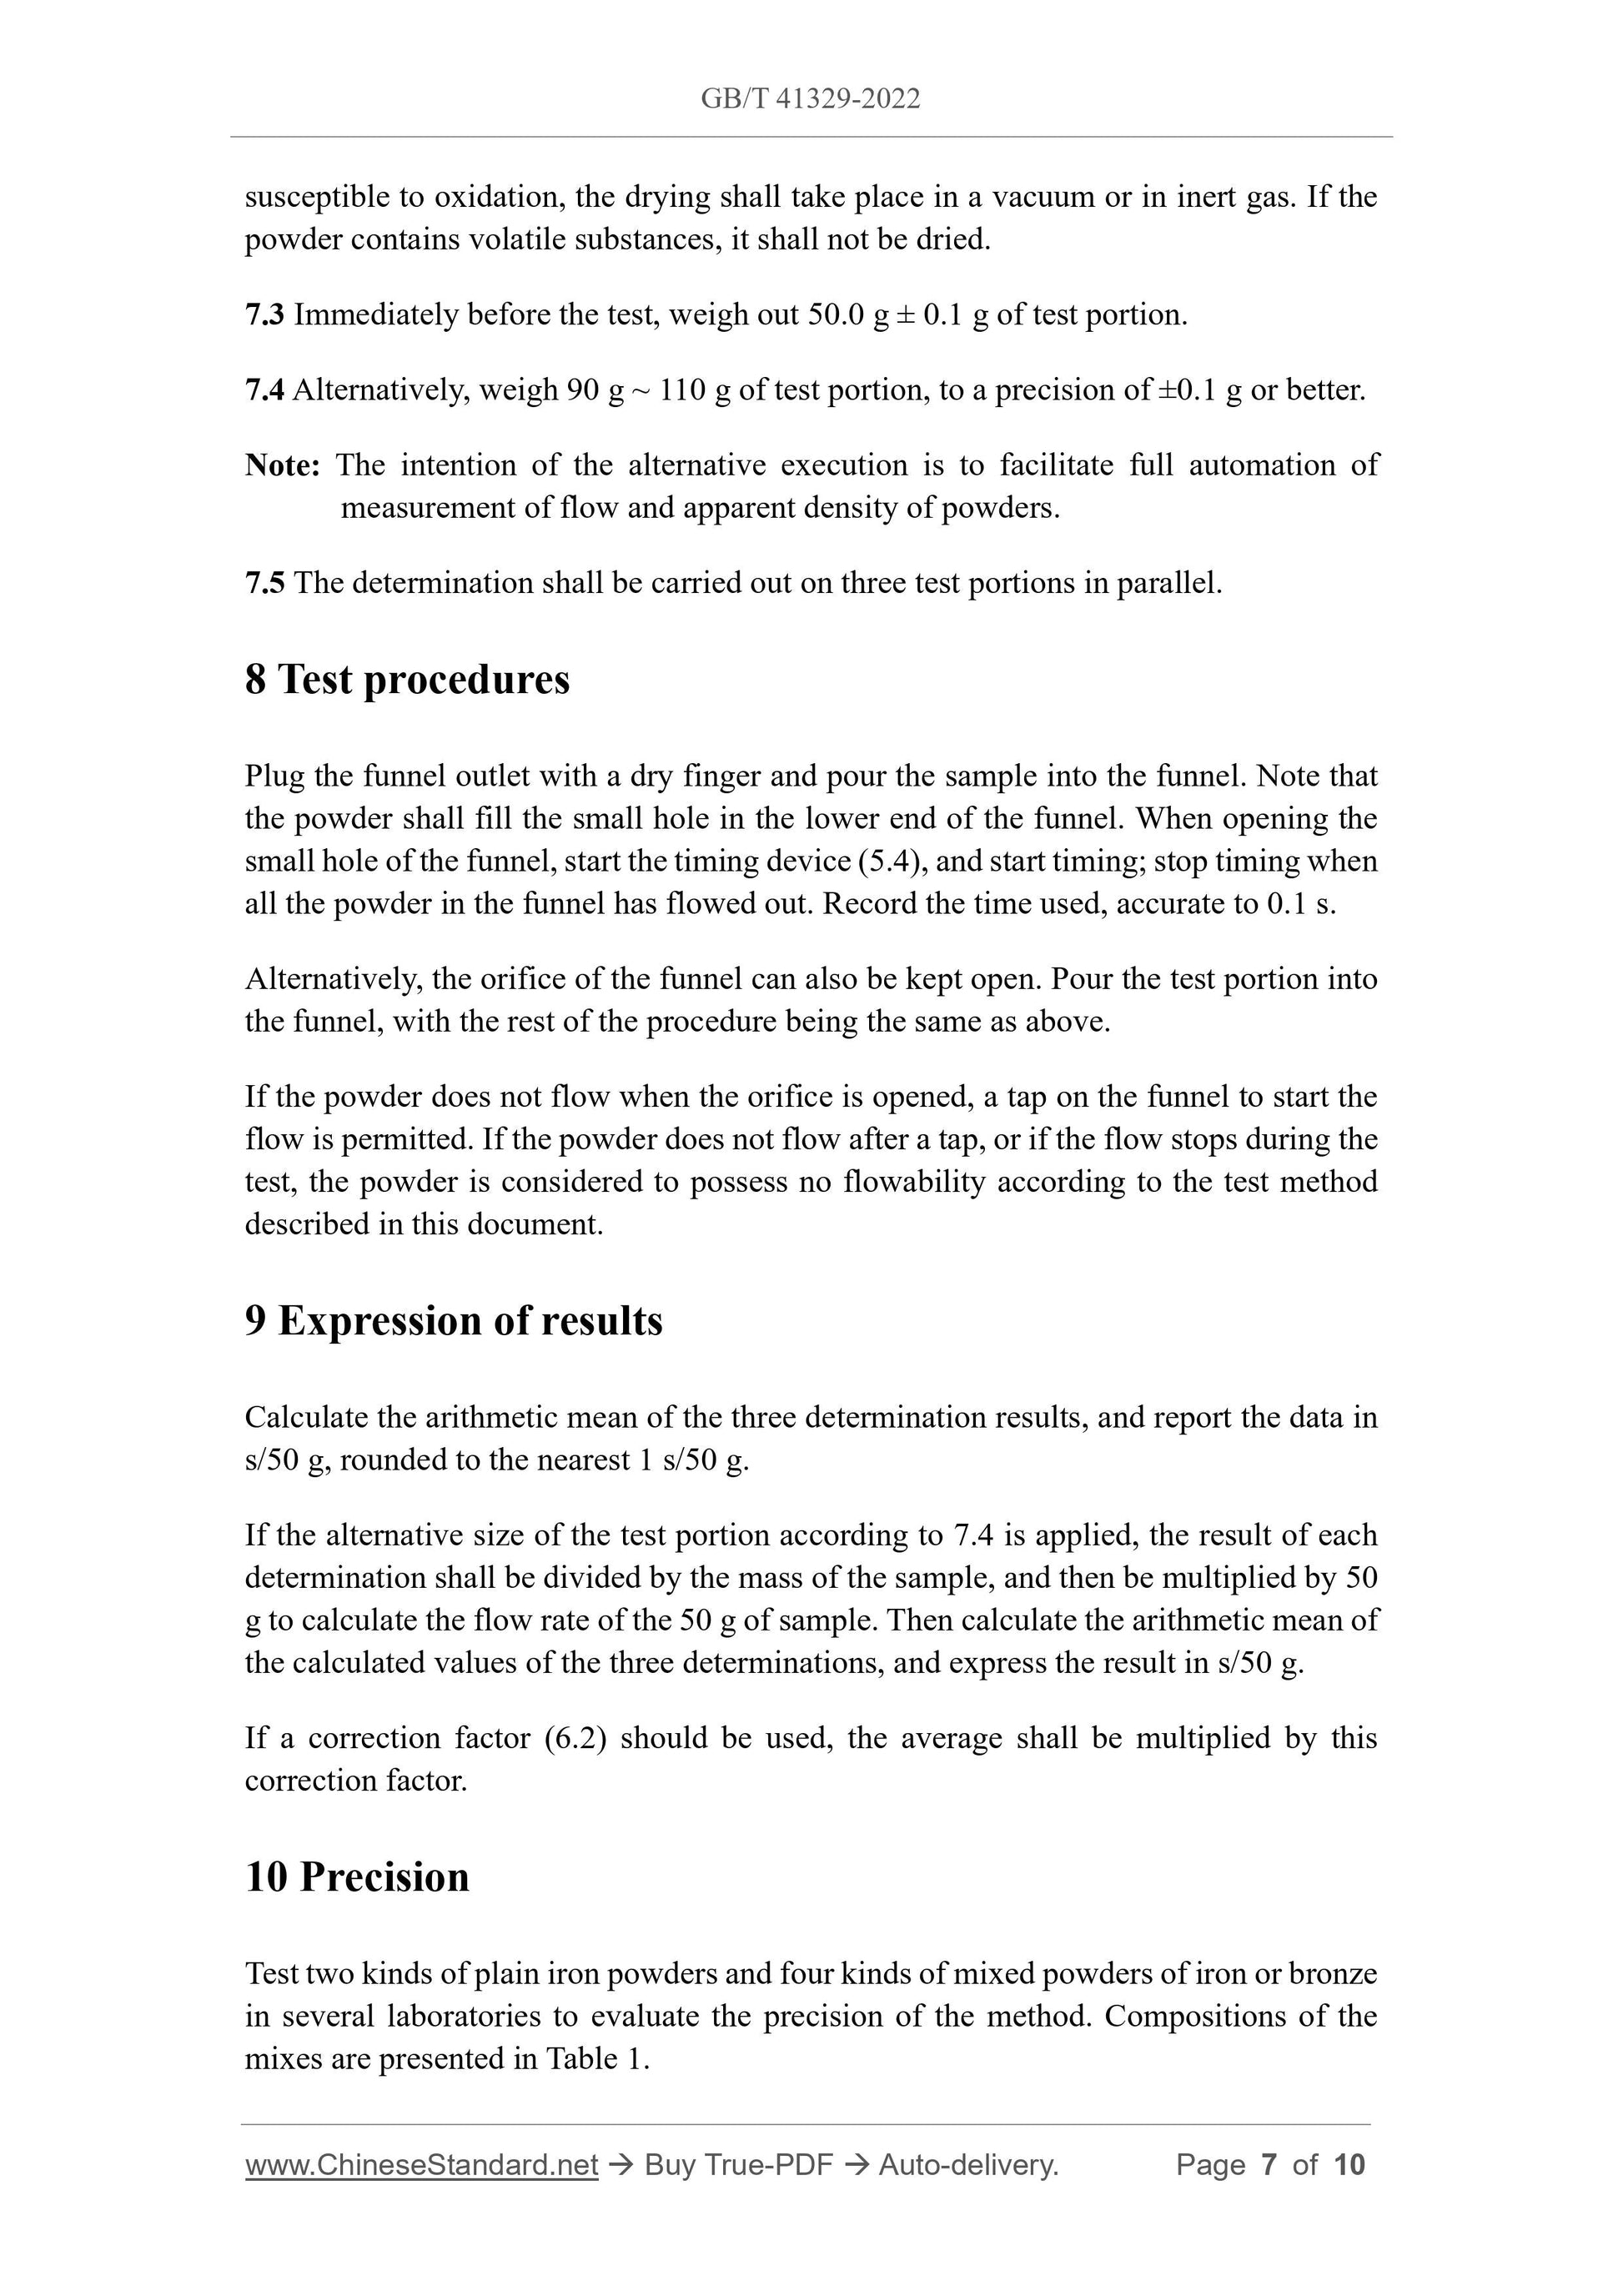 GB/T 41329-2022 Page 5